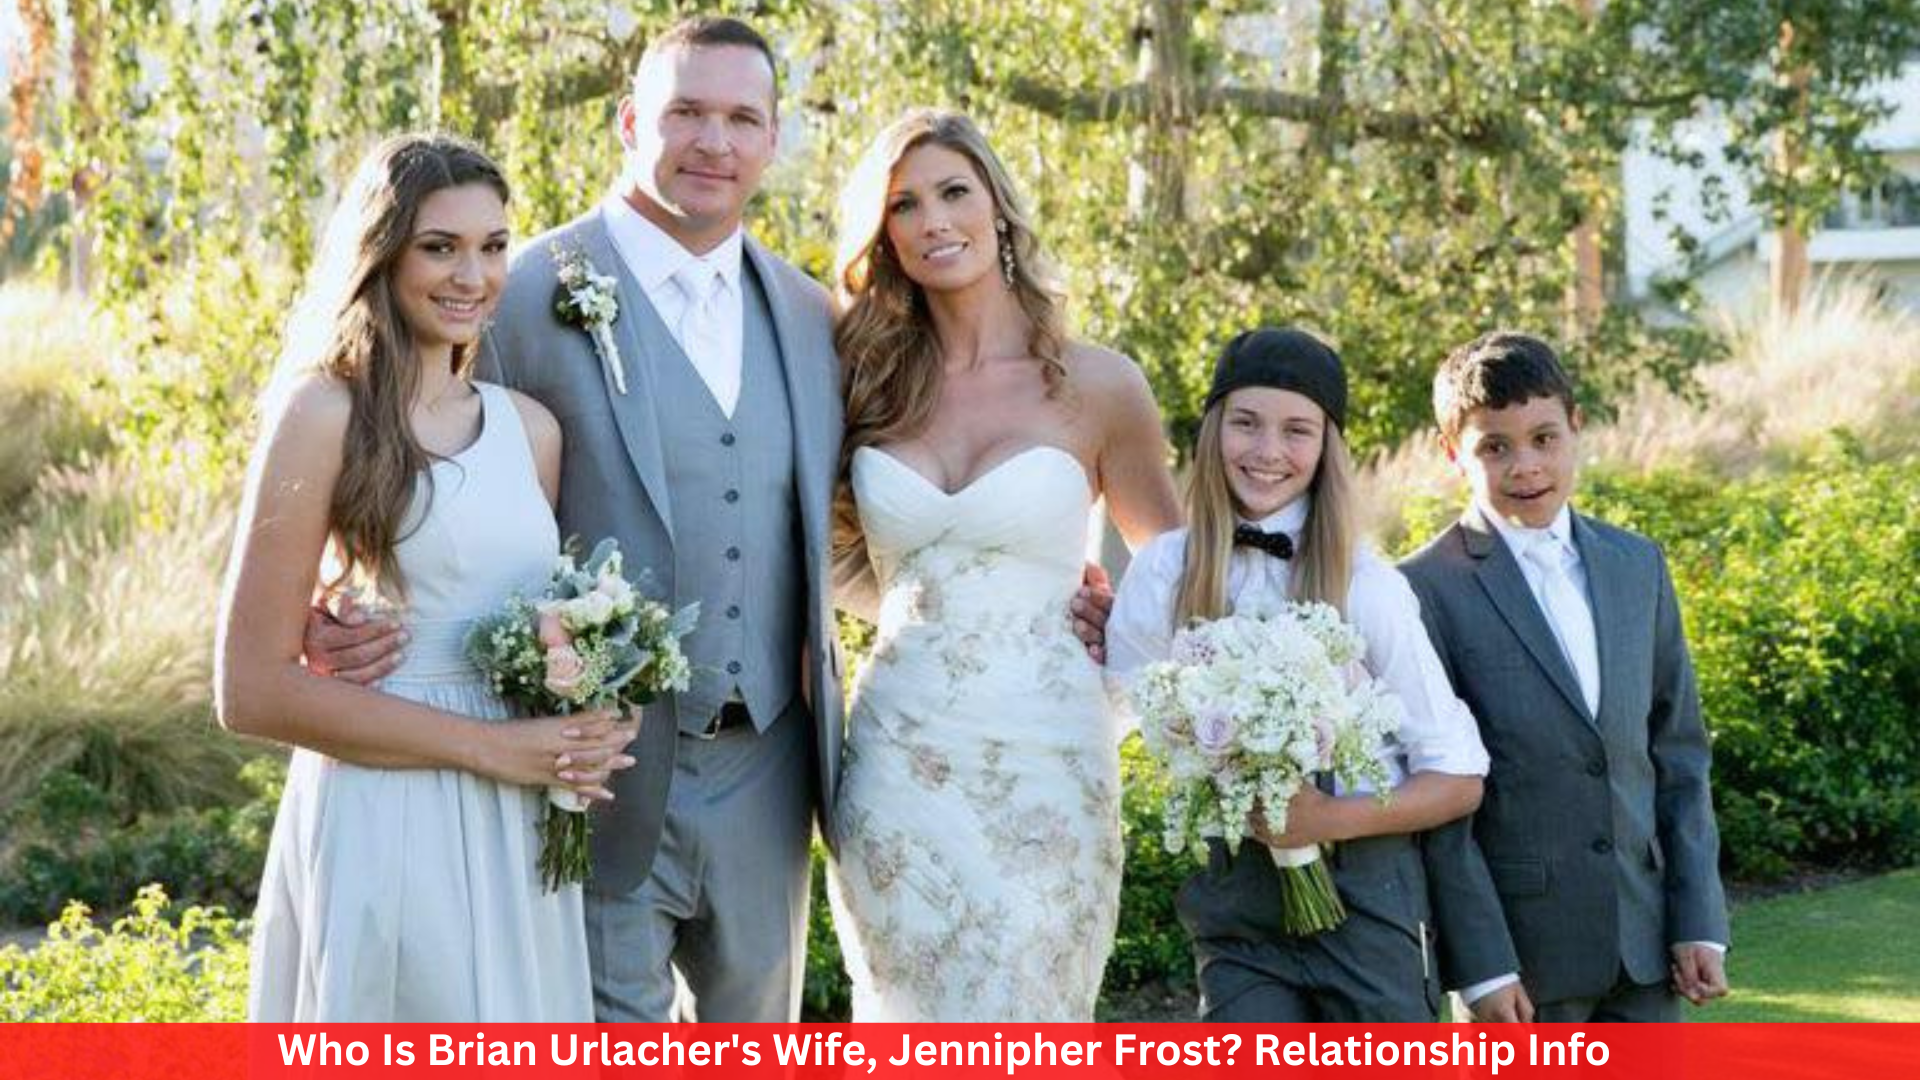 Who Is Brian Urlacher's Wife, Jennipher Frost? Relationship Info